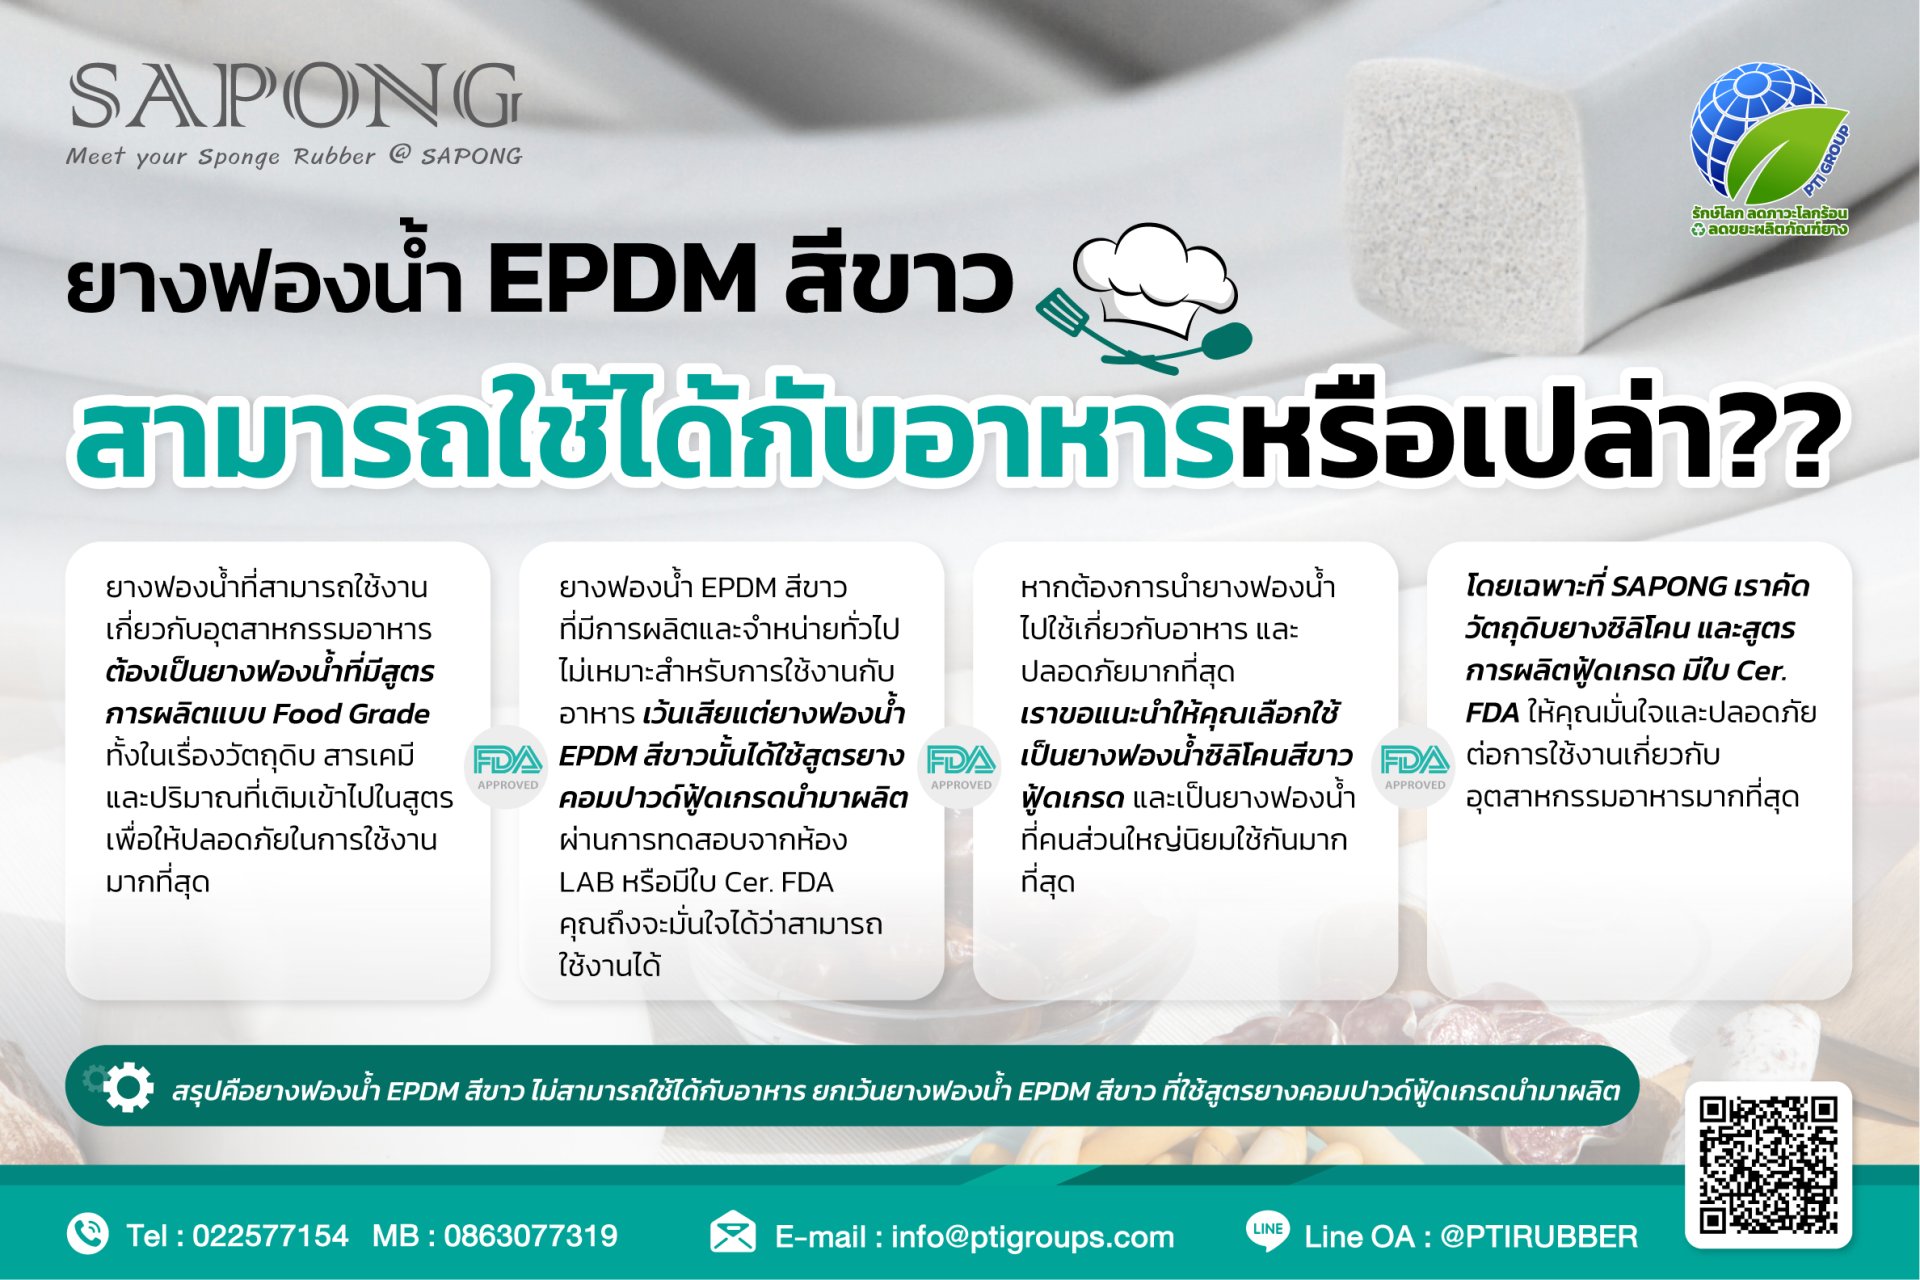 White EPDM sponge rubber can be used with food or not??